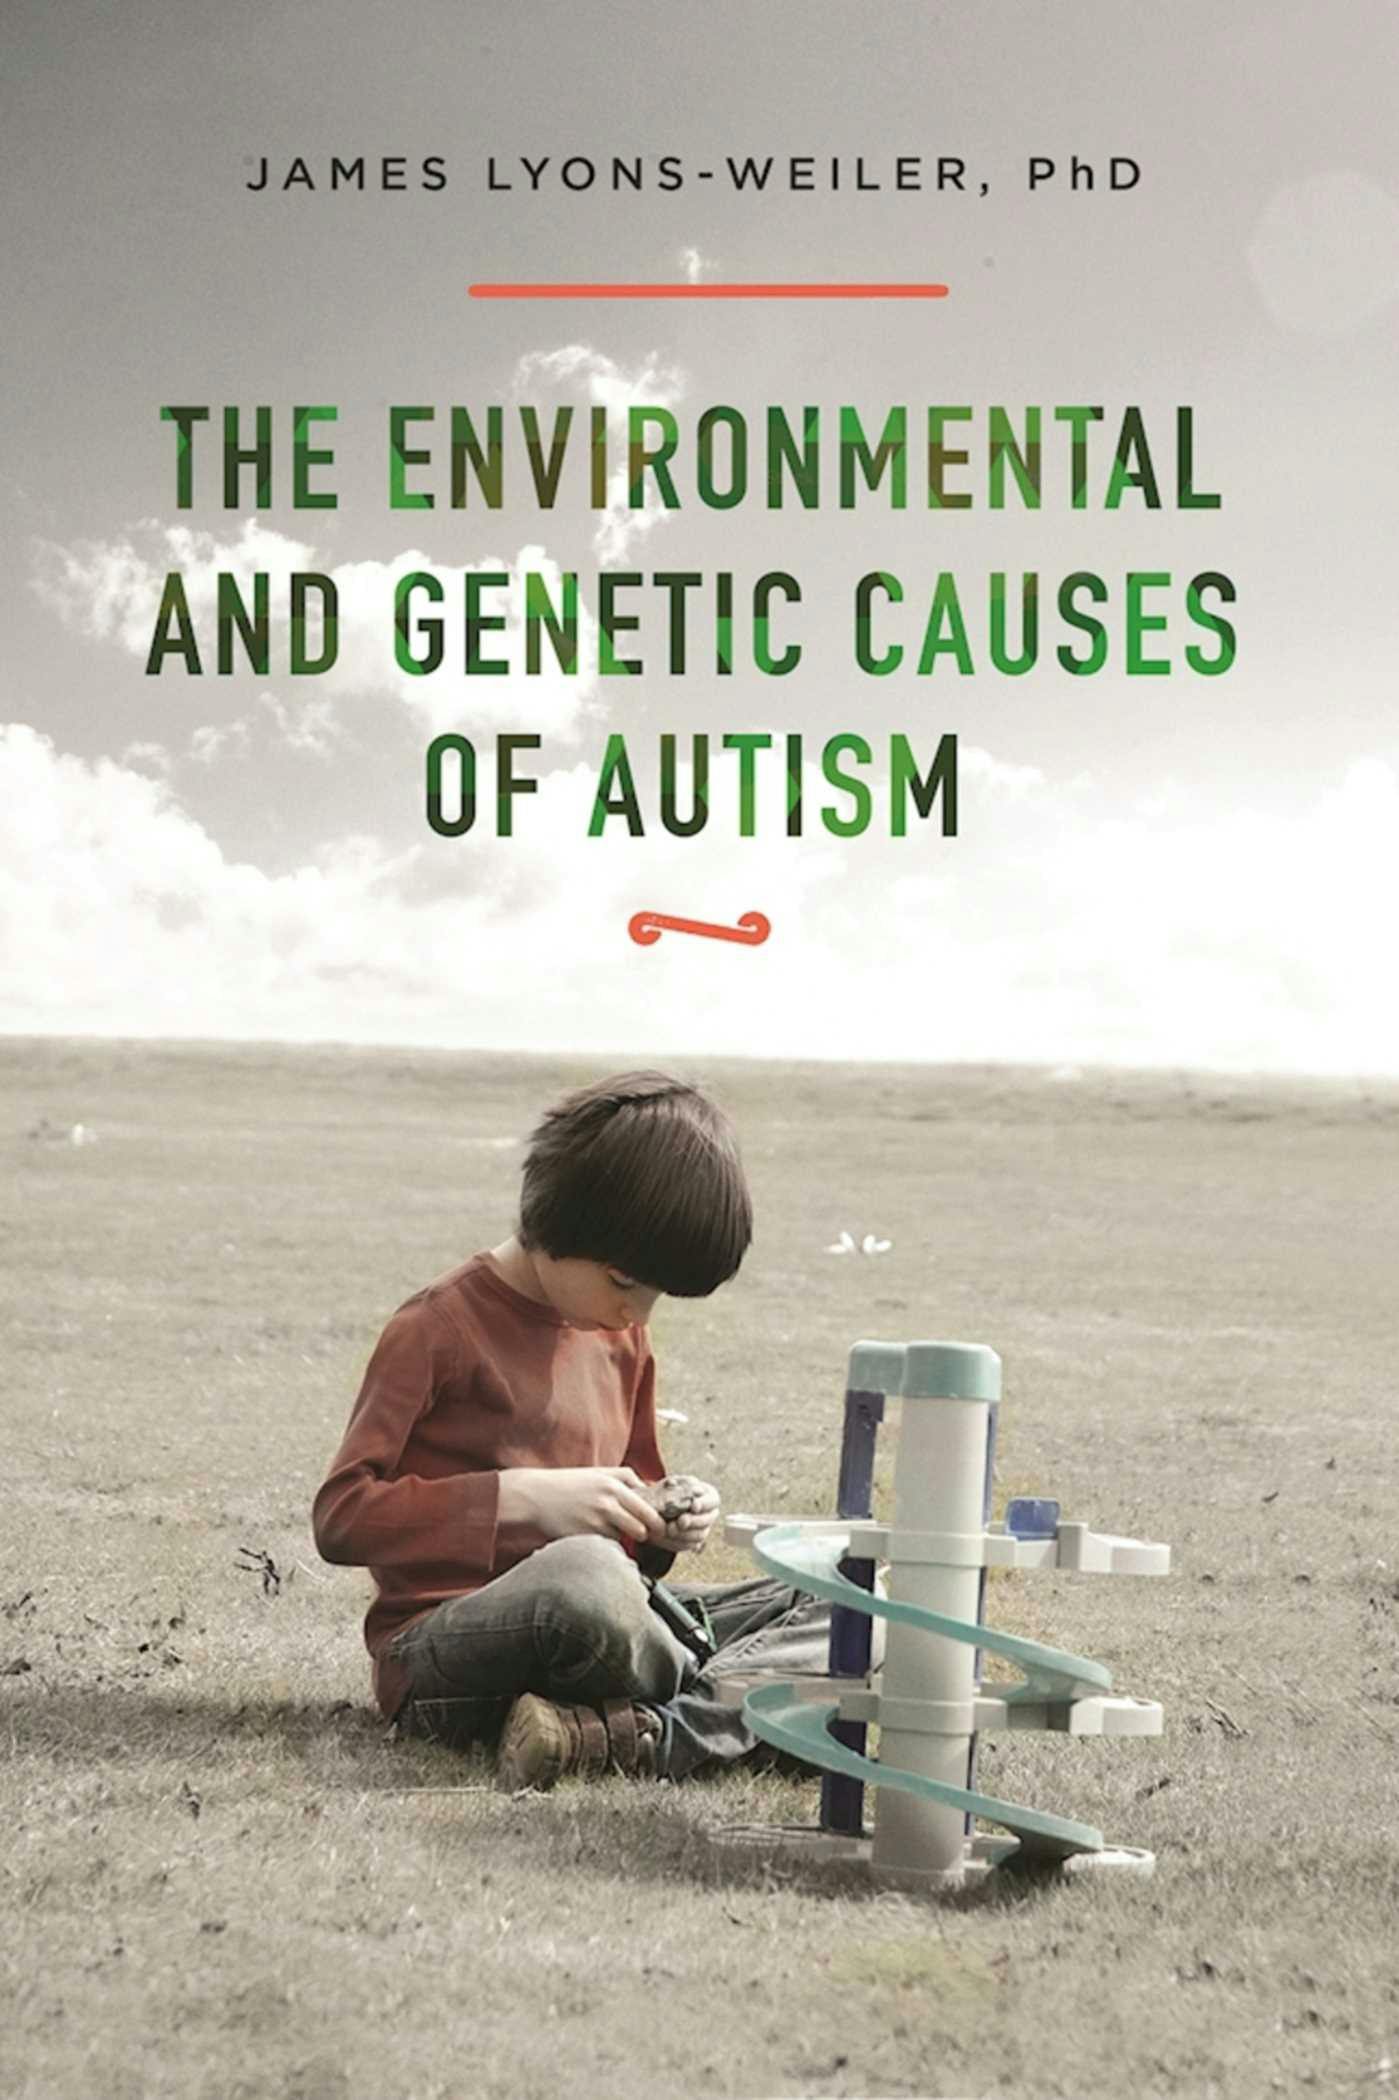 The Environmental and Genetic Causes of Autism - James Lyons-Weiler